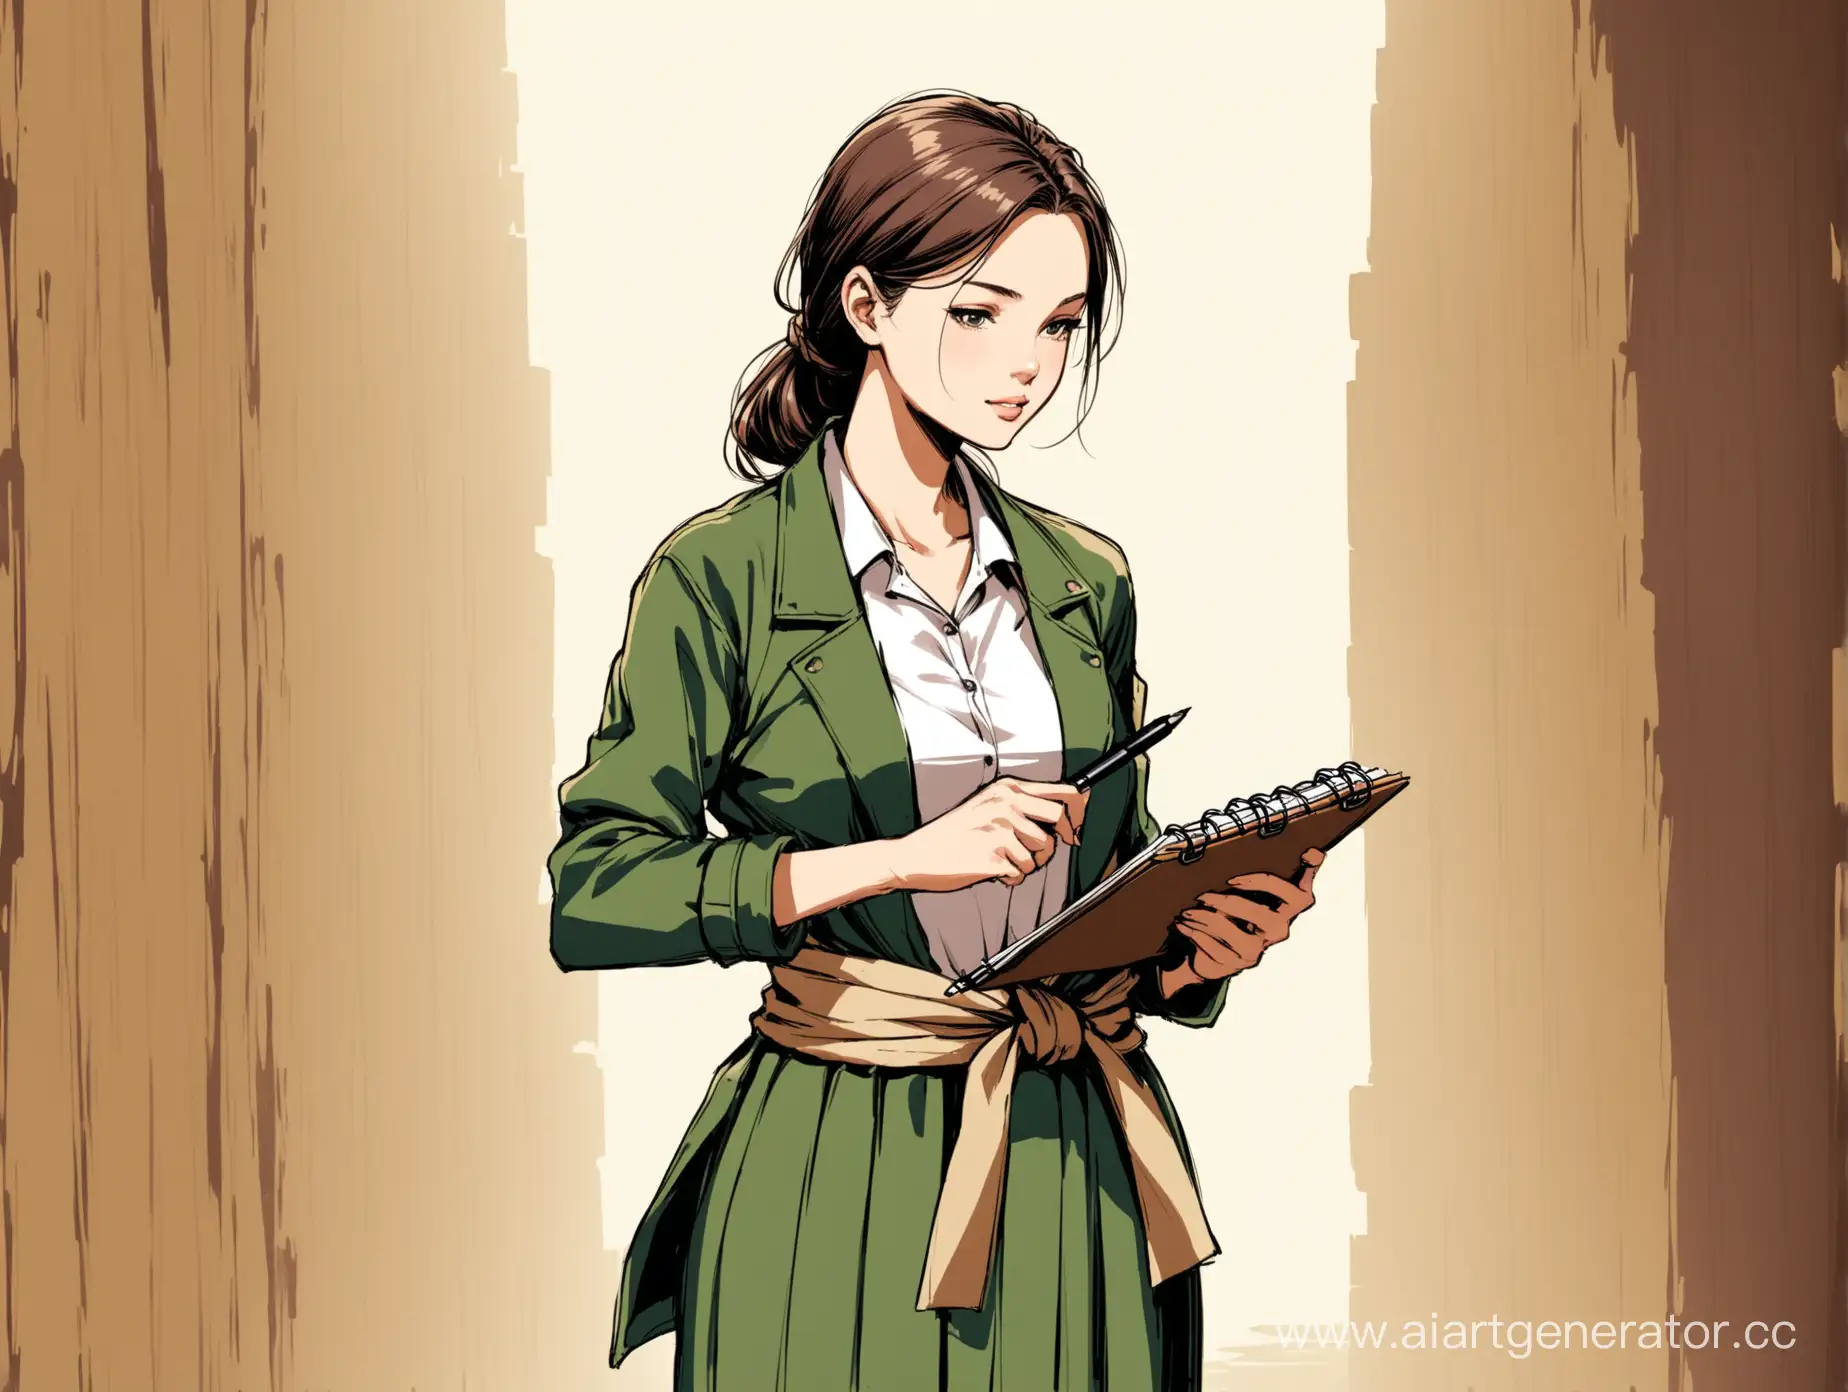 Woman-with-Notepad-and-Pen-Wearing-Jacket-Tied-Around-Waist